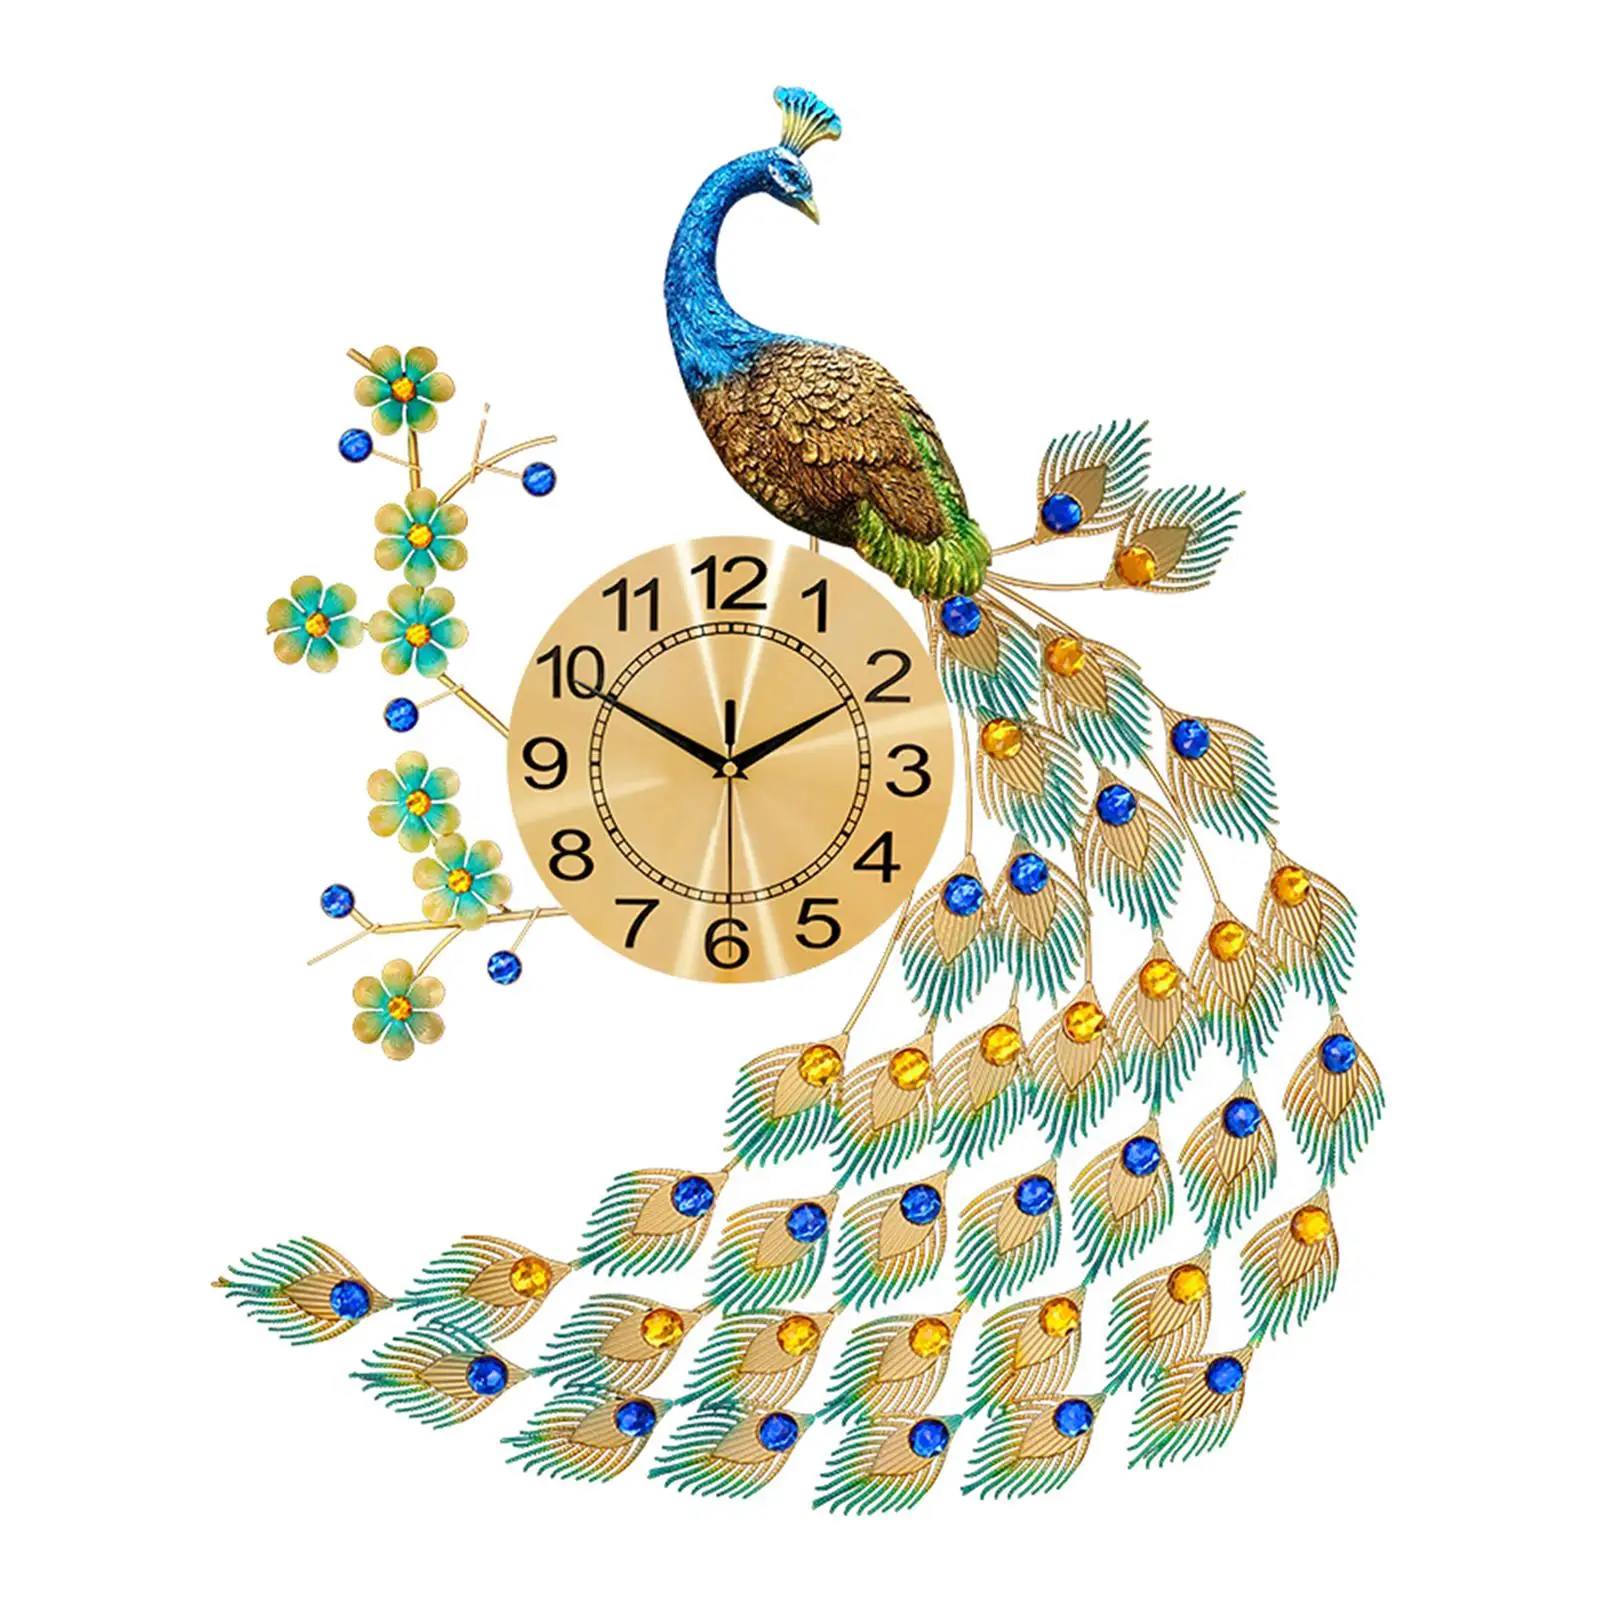 Modern Peacock Wall Clock Silent Non Ticking for Restaurant Dining Room Cafe